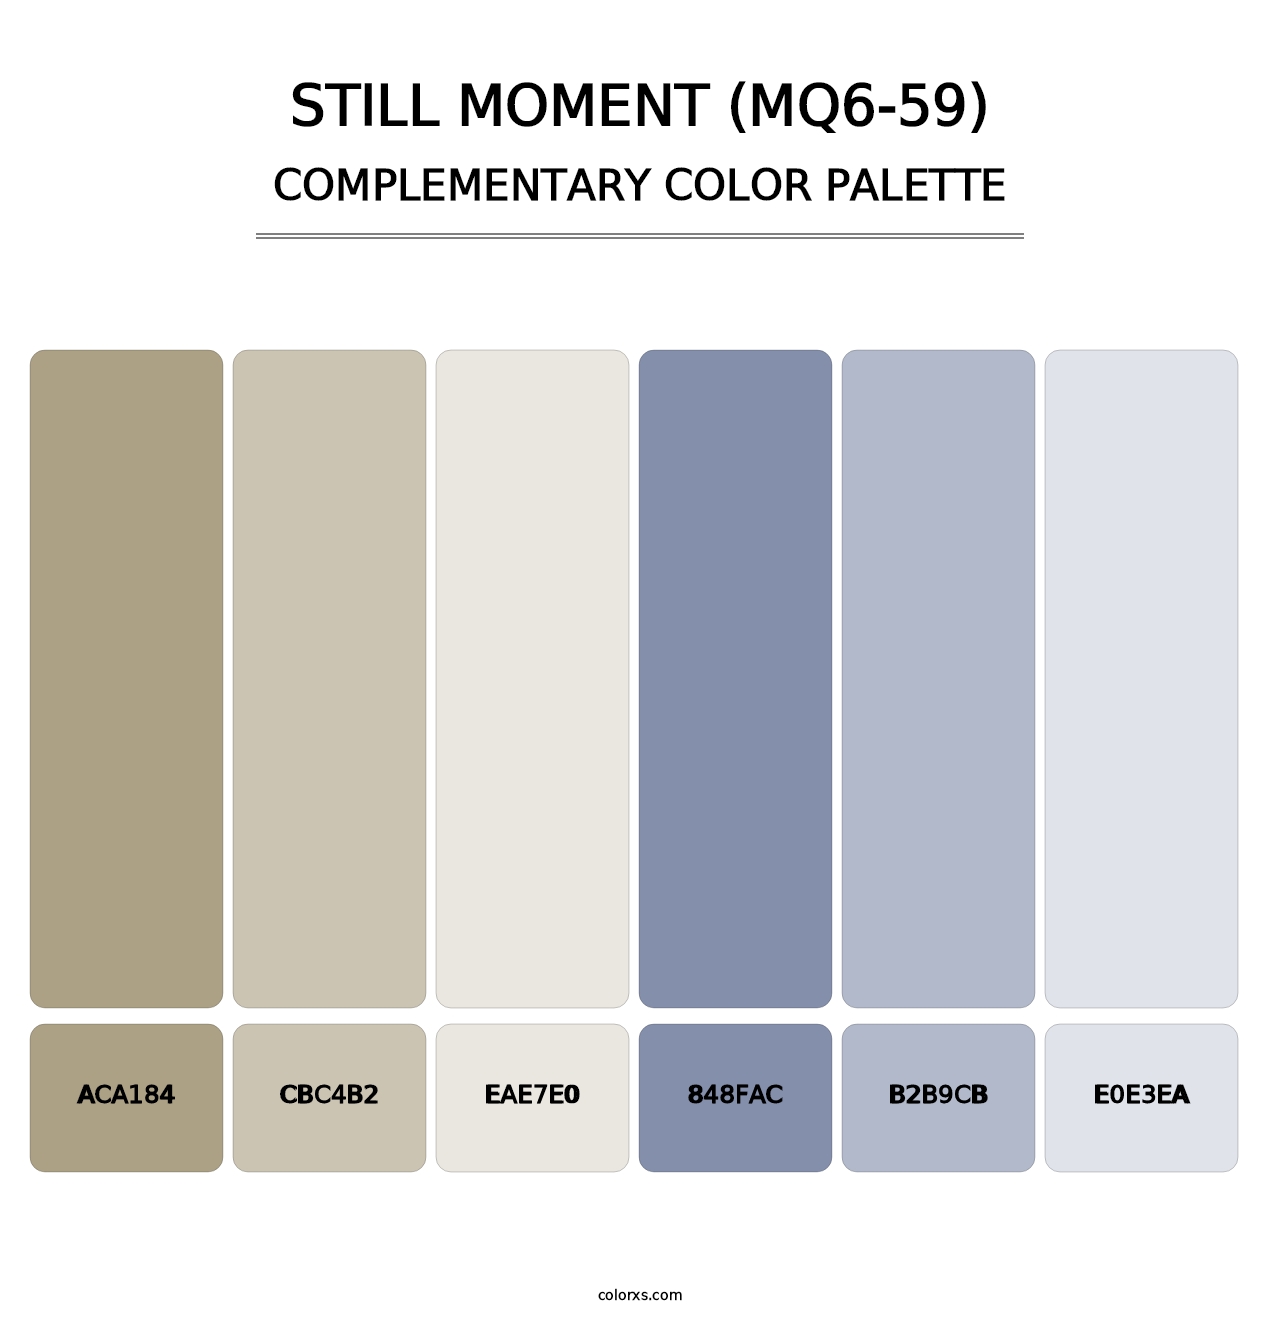 Still Moment (MQ6-59) - Complementary Color Palette